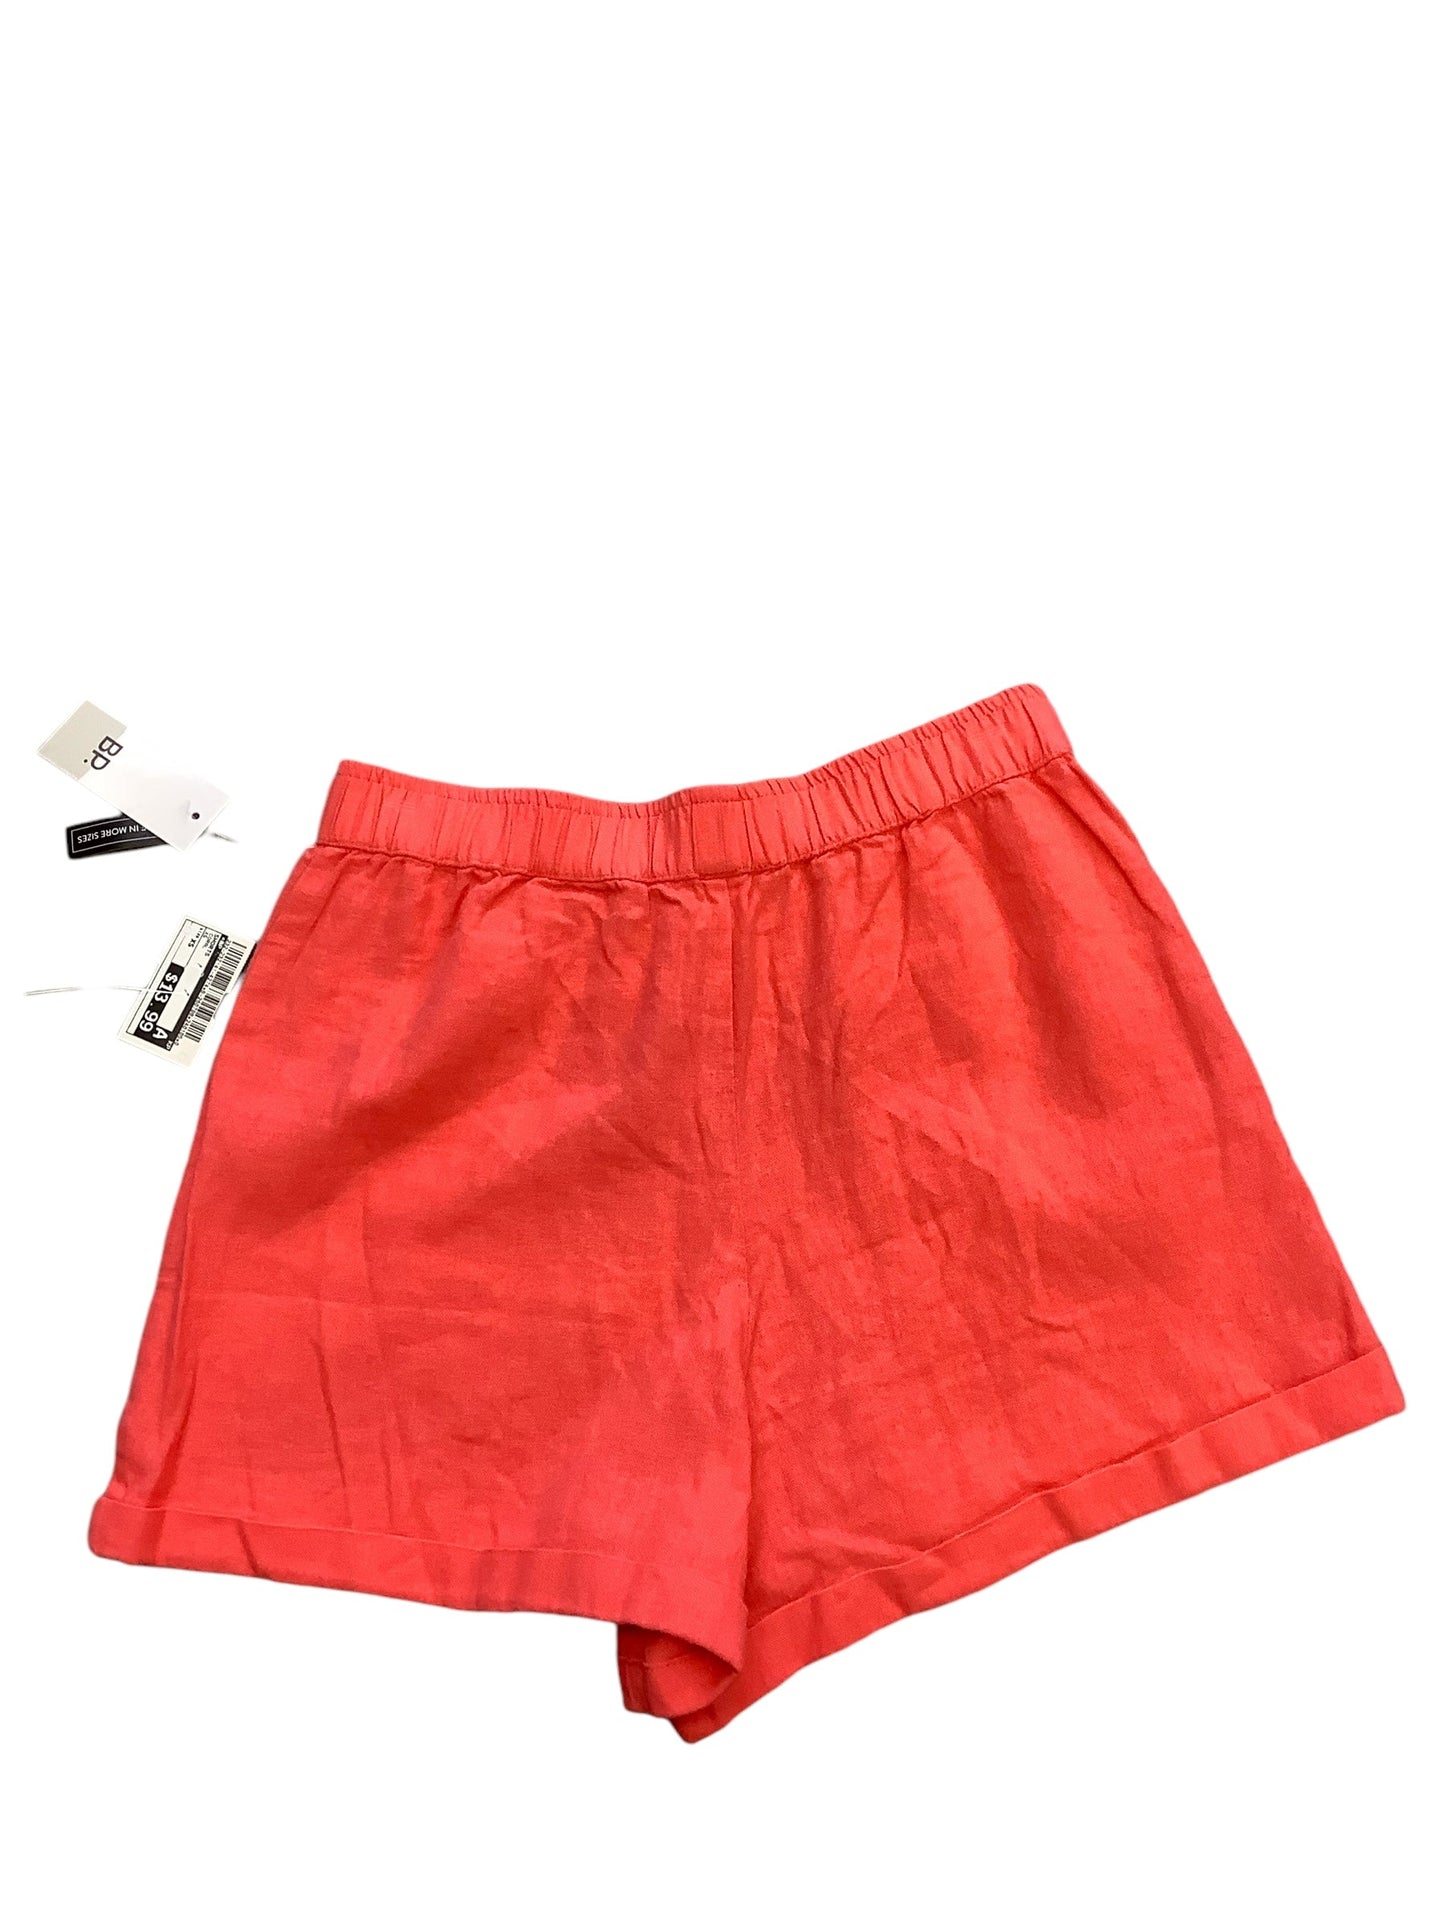 Shorts By Bp  Size: Xs